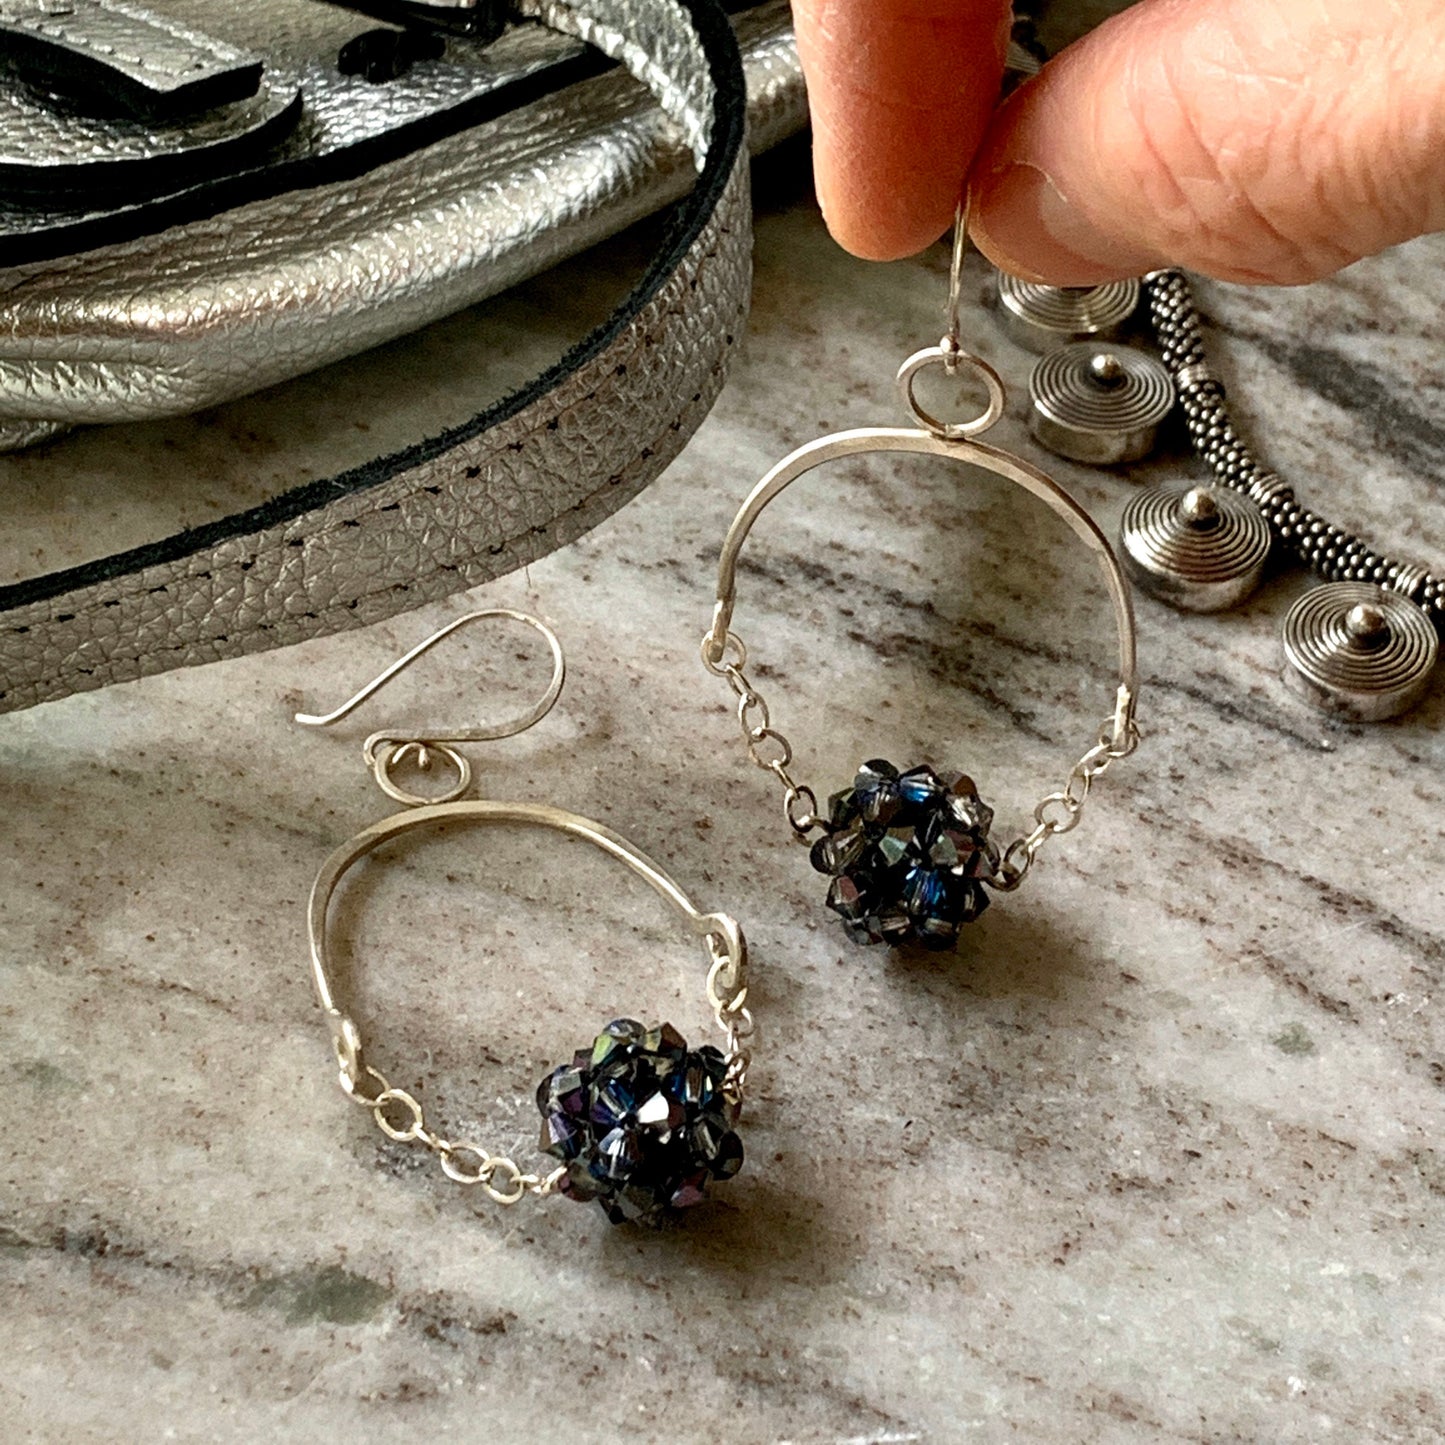 Sterling silver chandelier earrings with Swarovski crystals - Boho chic jewelry for women - unique, handmade, earthy design in silver.